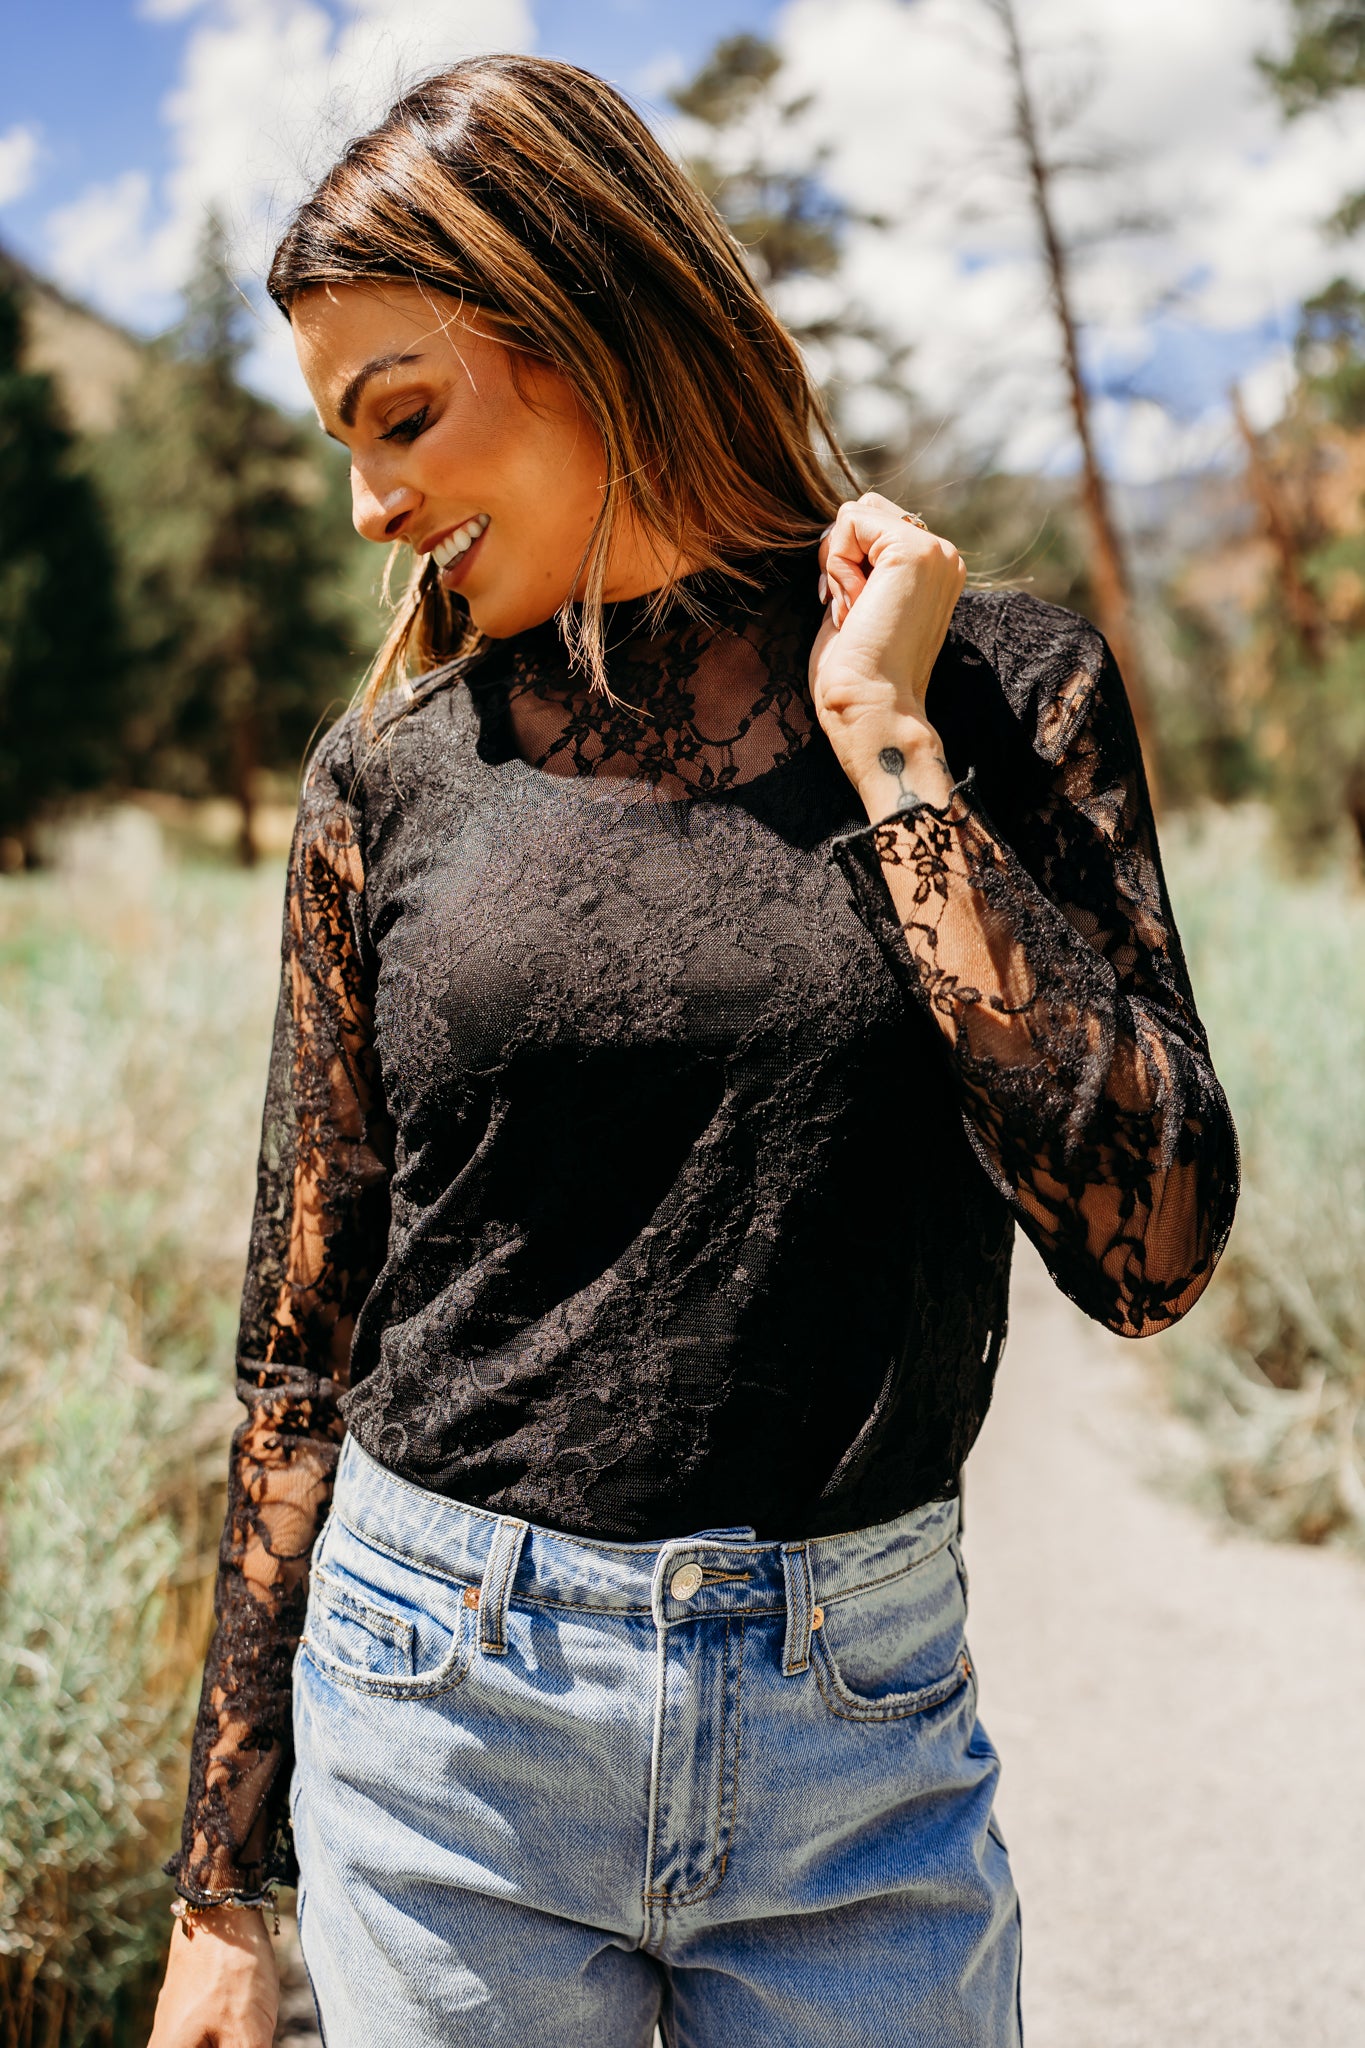 THE FLORAL LACE MOCK NECK TOP IN BLACK